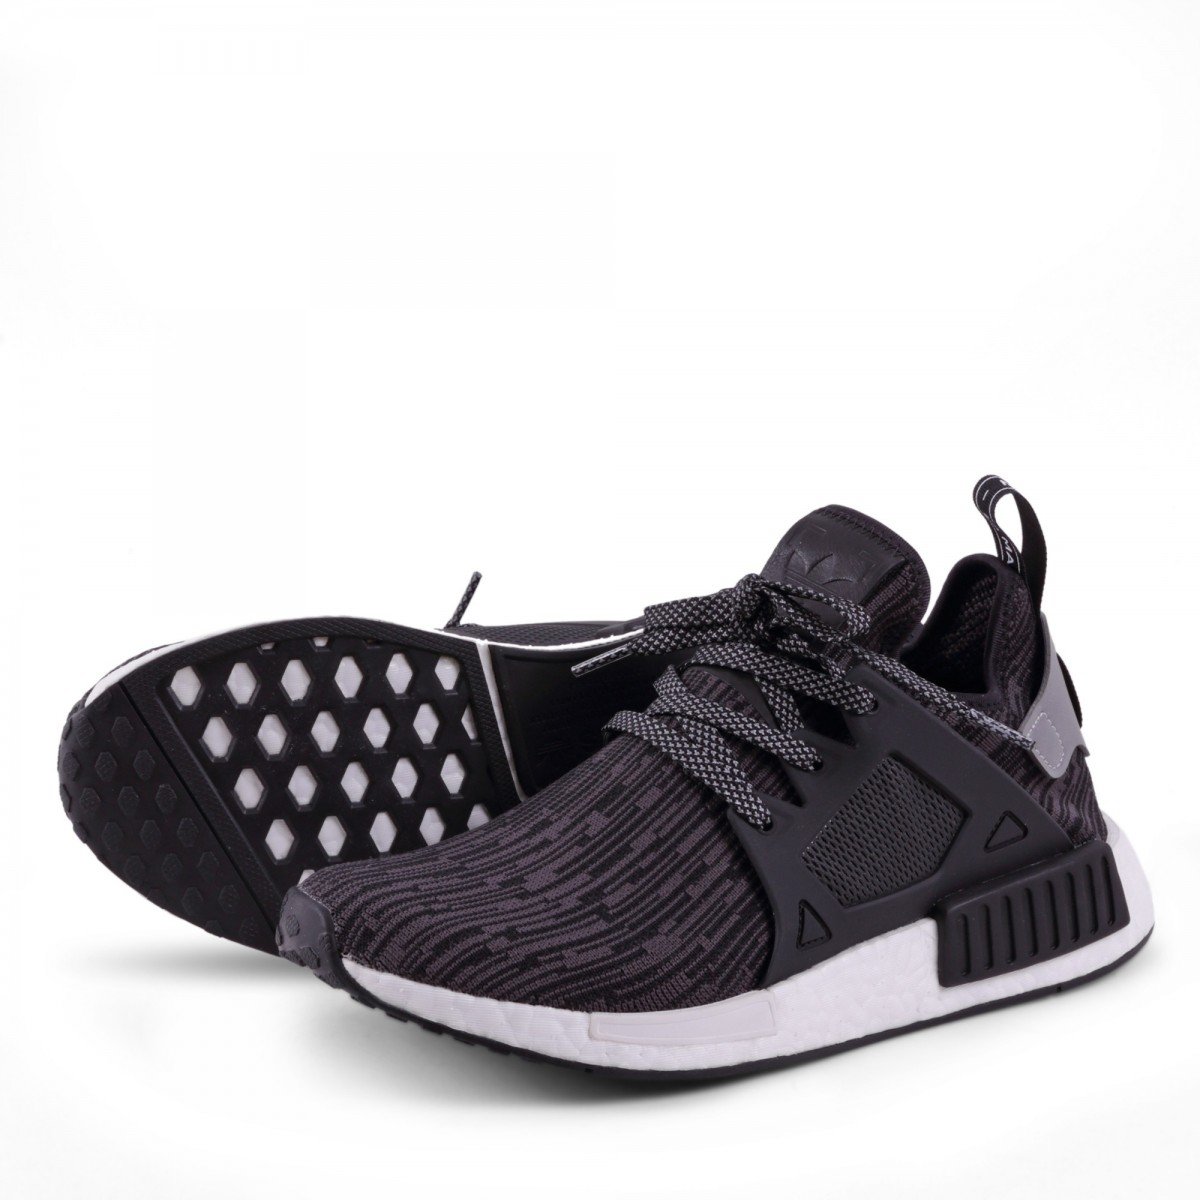 NMD_XR1 S77195